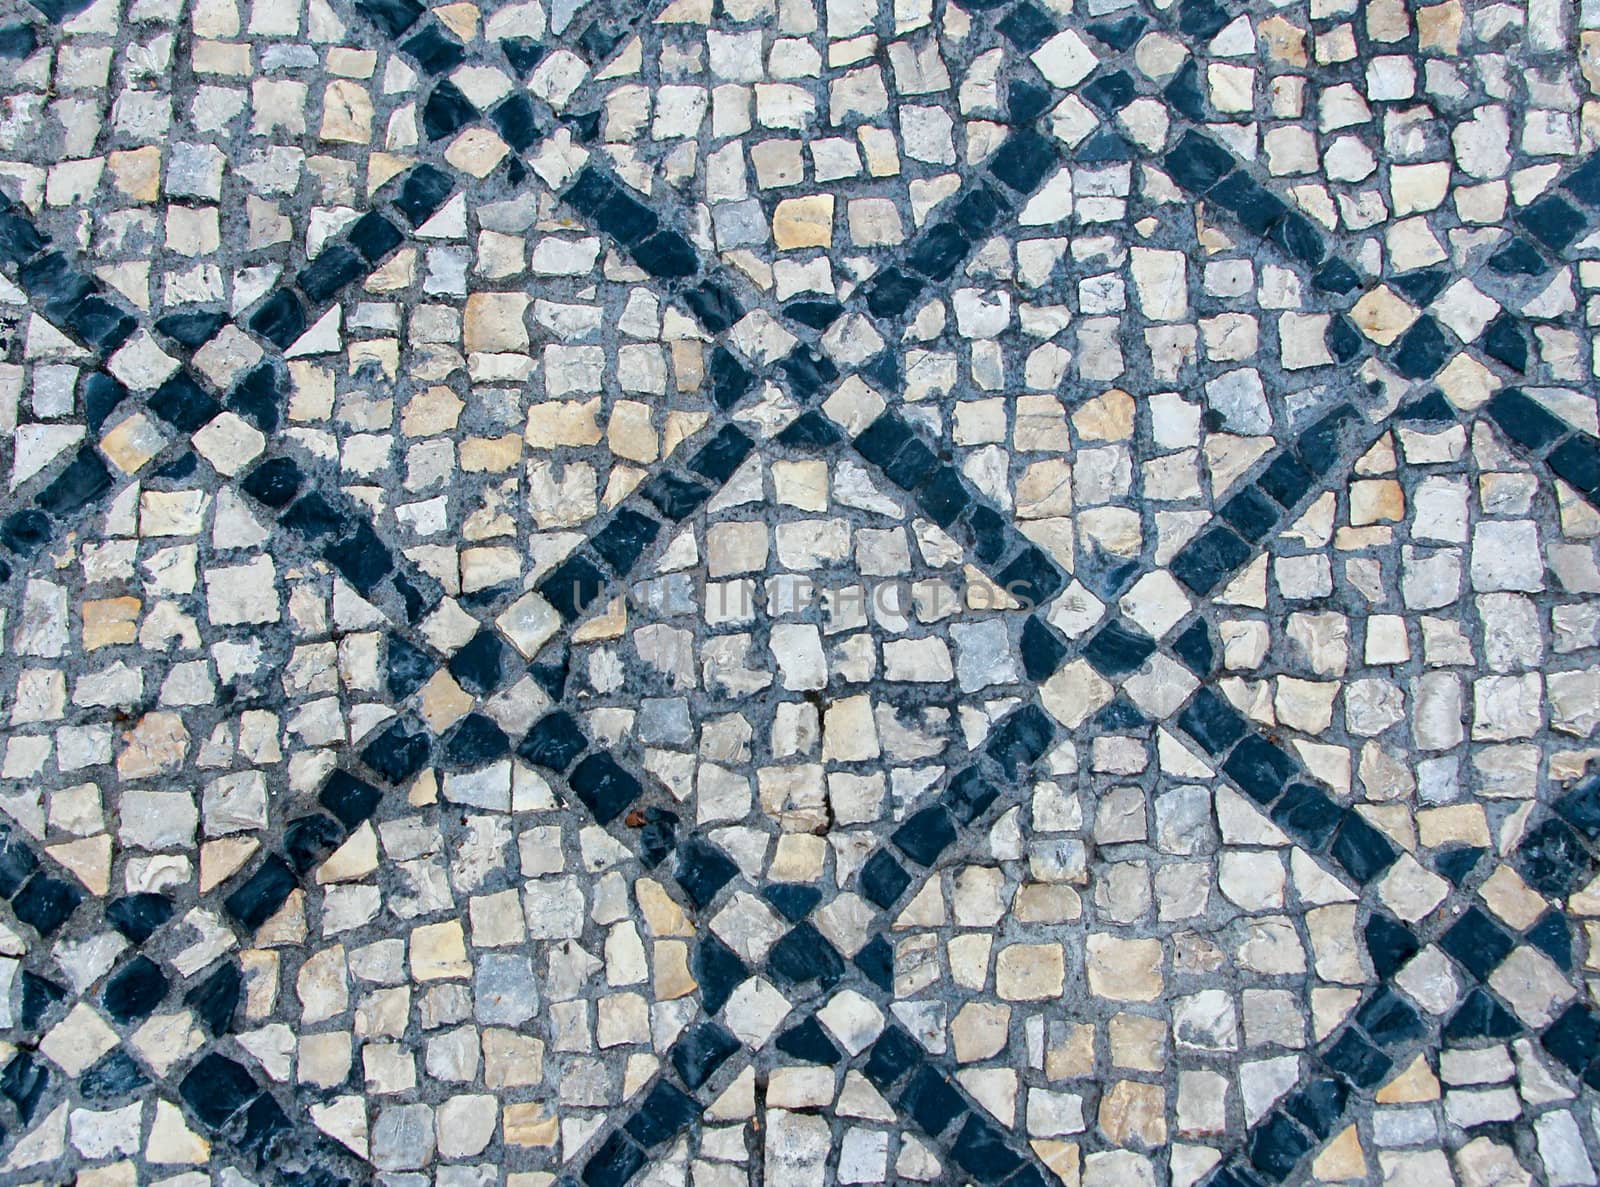 Clear stone blocks pavement texture with a dark central squares motive for background